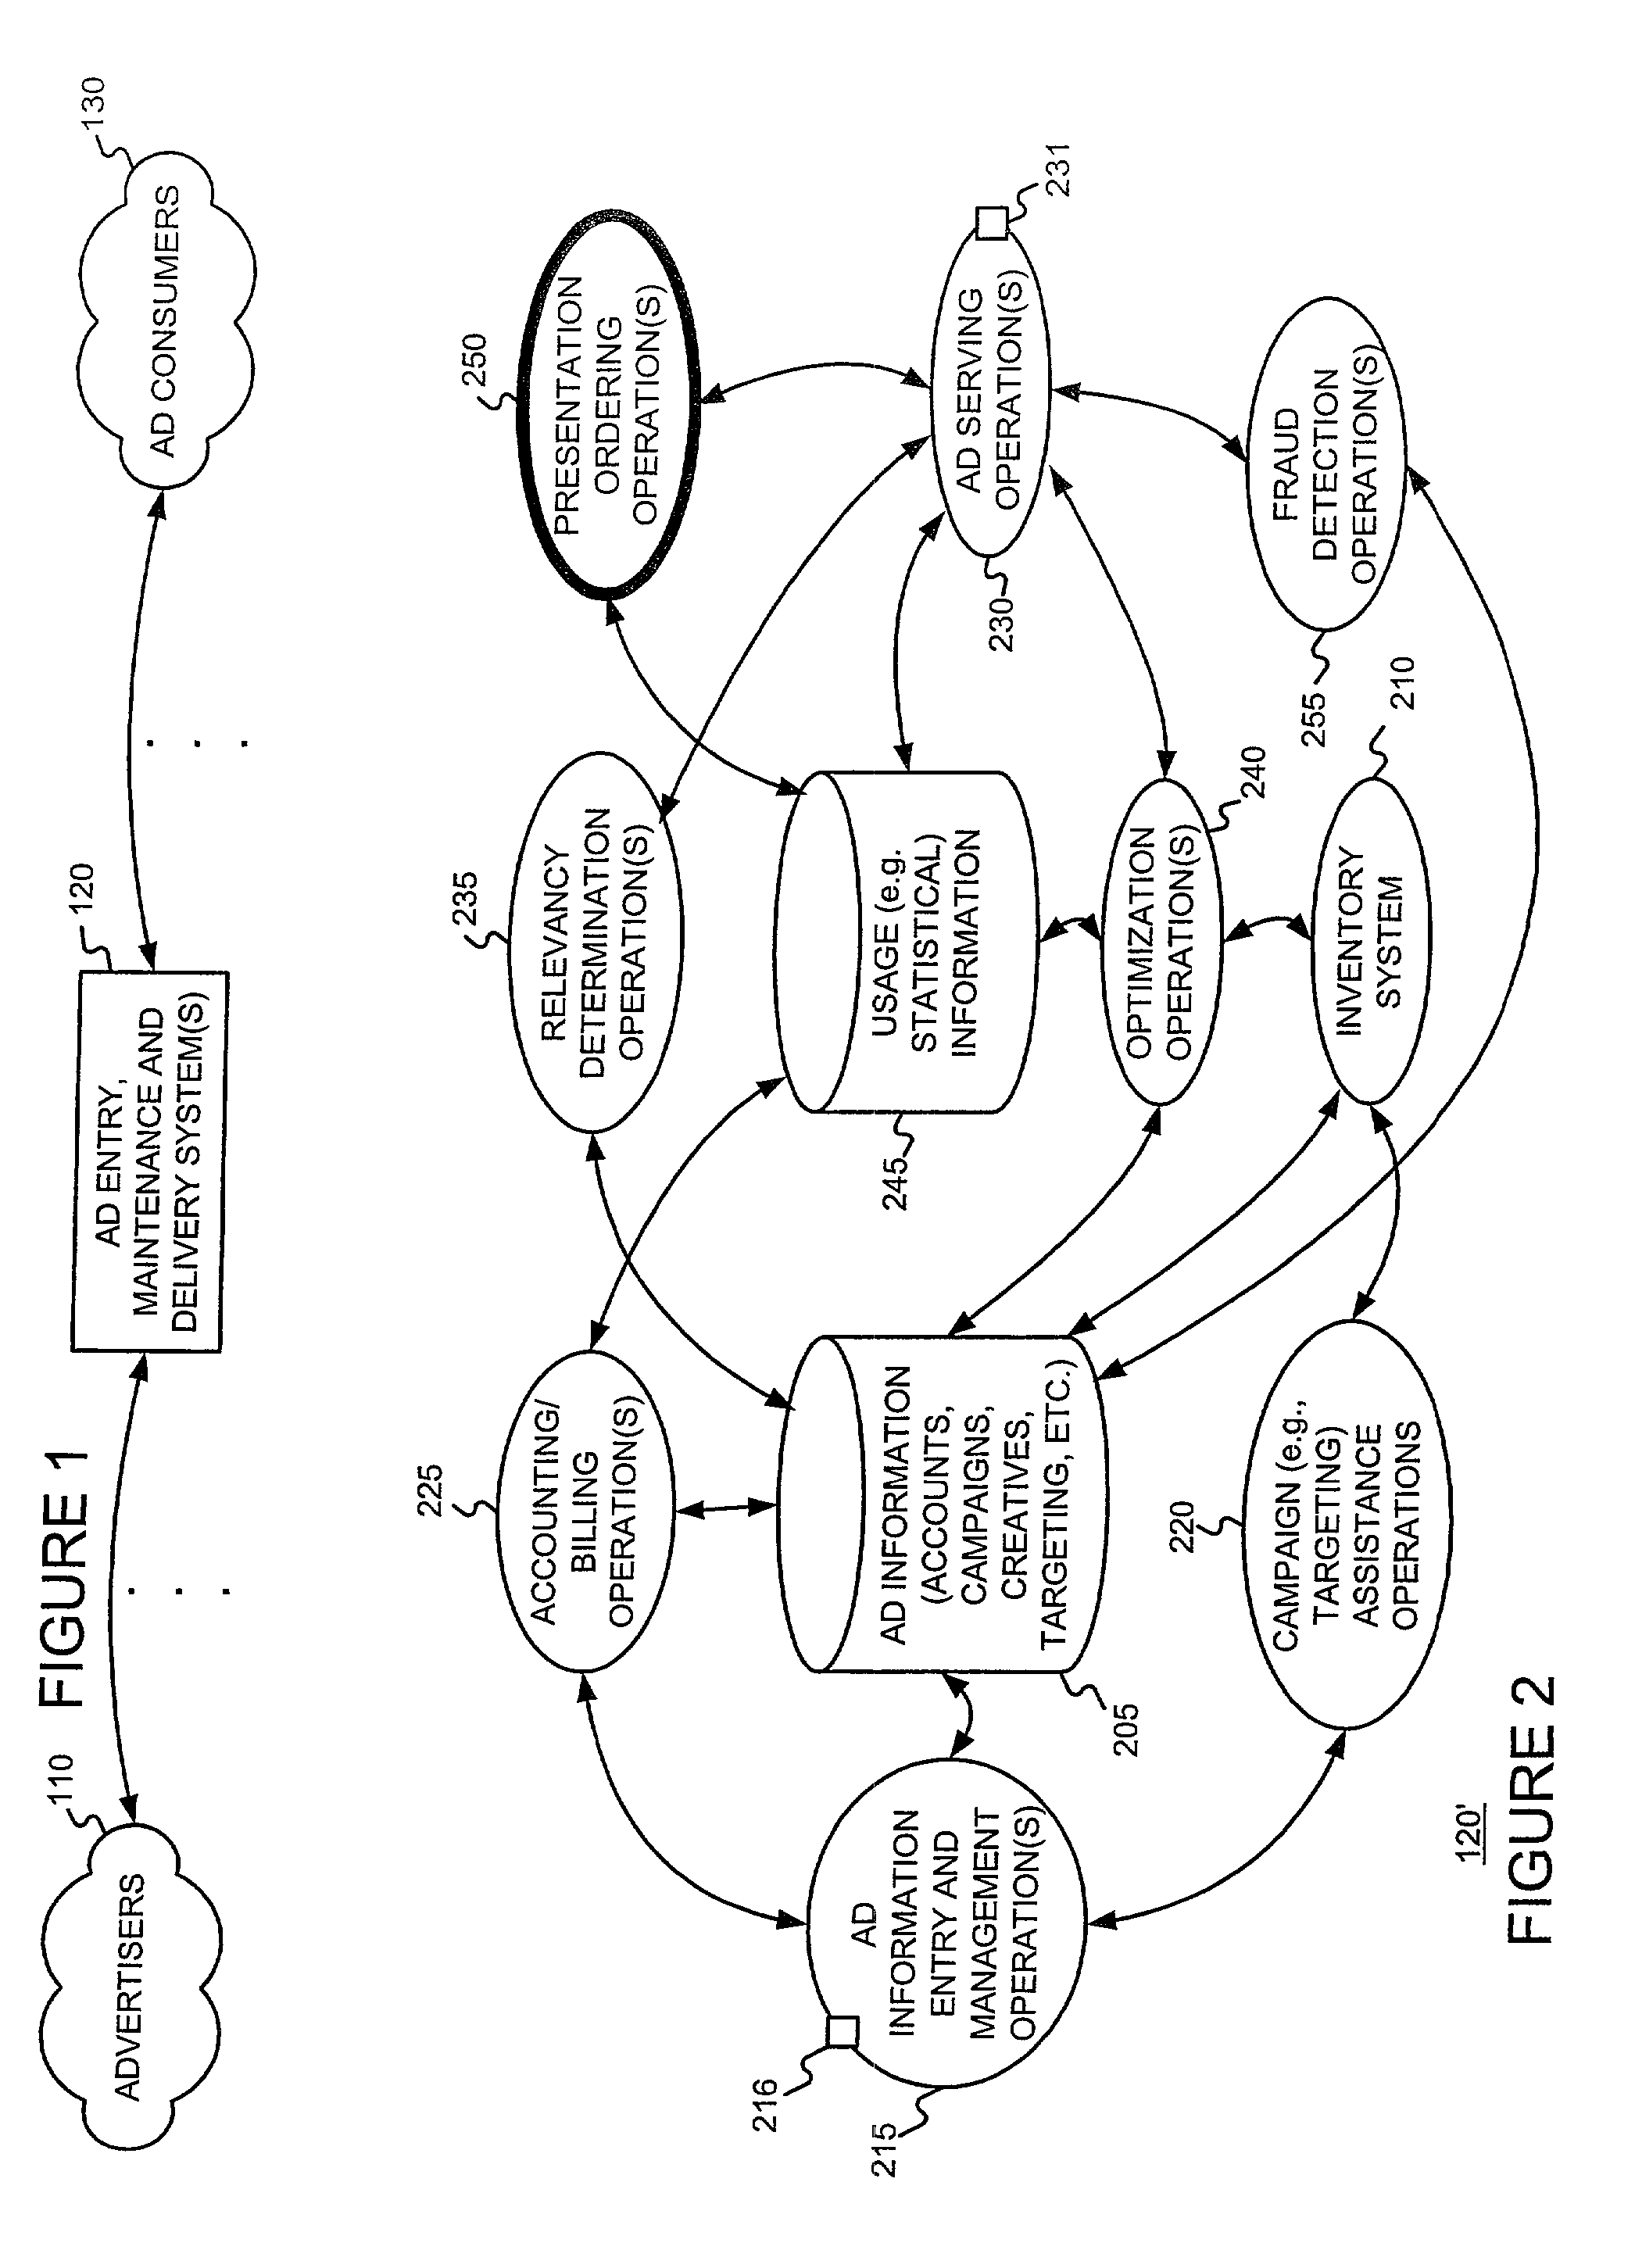 Methods and apparatus for ordering advertisements based on performance information and price information